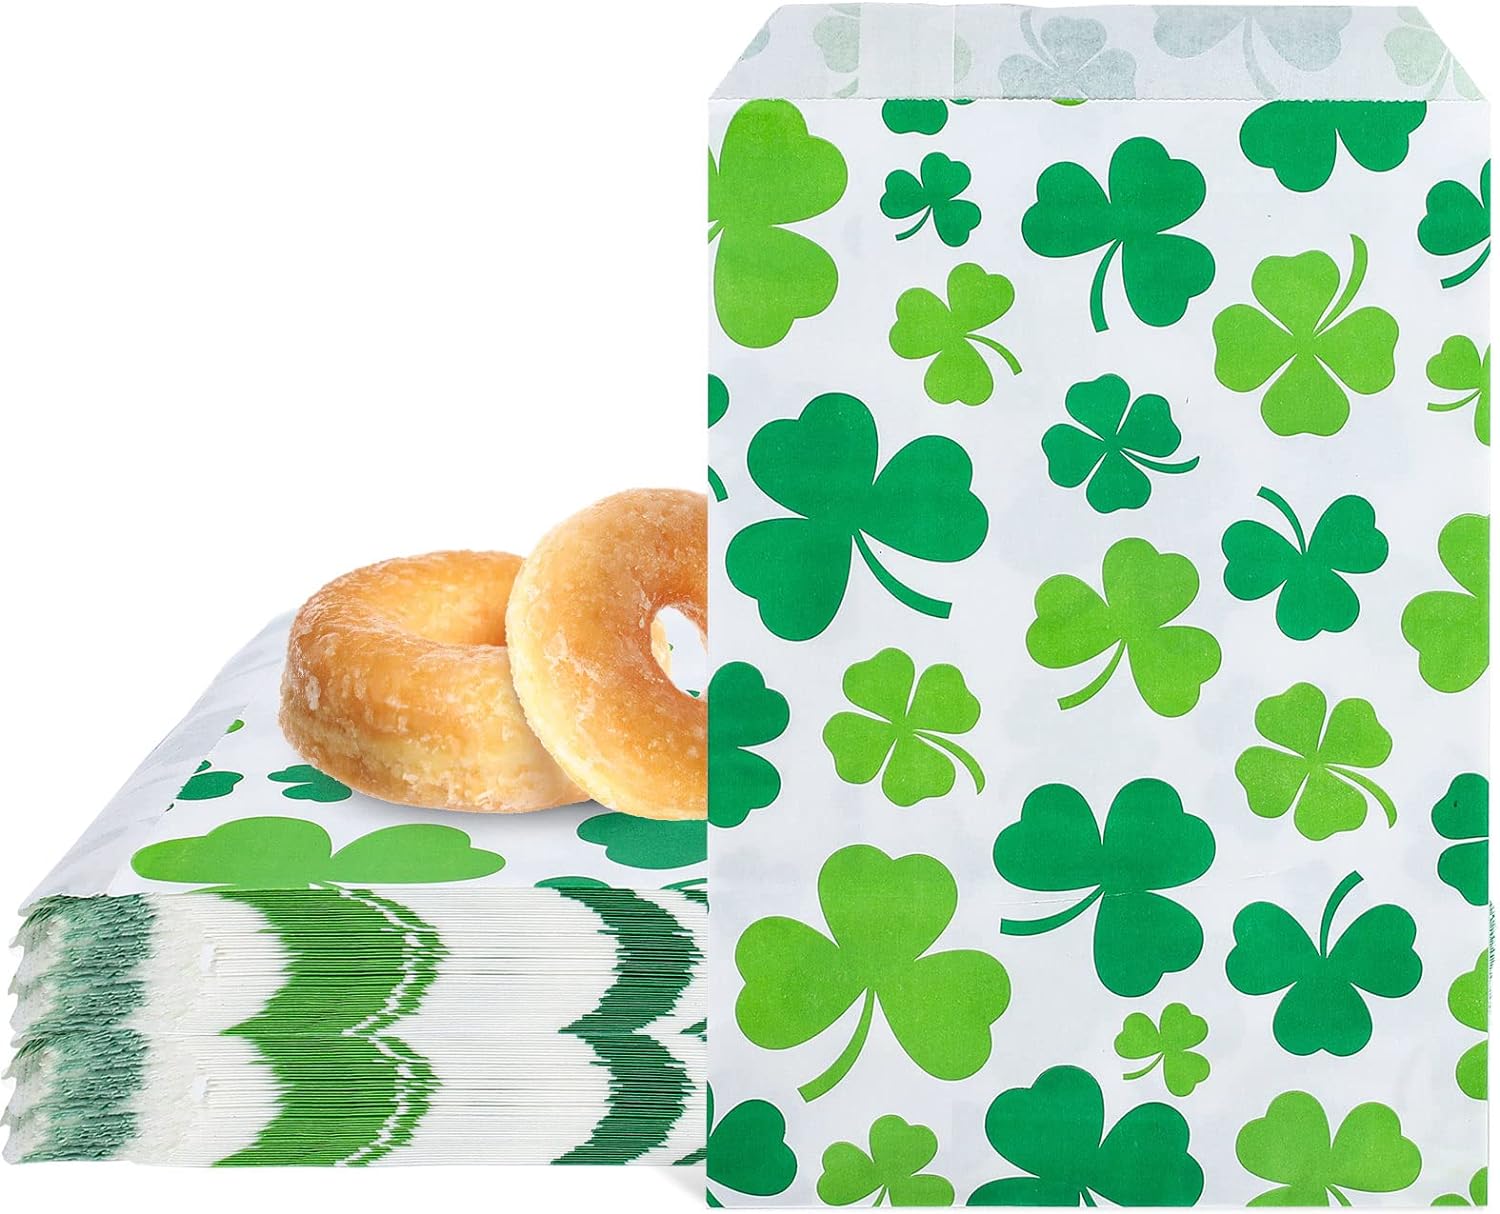 Whaline 100 Pack St. Patrick' Day Treat Bags Green Shamrock Gift Paper Bags Clover Prints Candy Treat Bags Rustic Irish Party Goodies Snack Cookie Buffet Bags for Holiday Party Favor Supplies